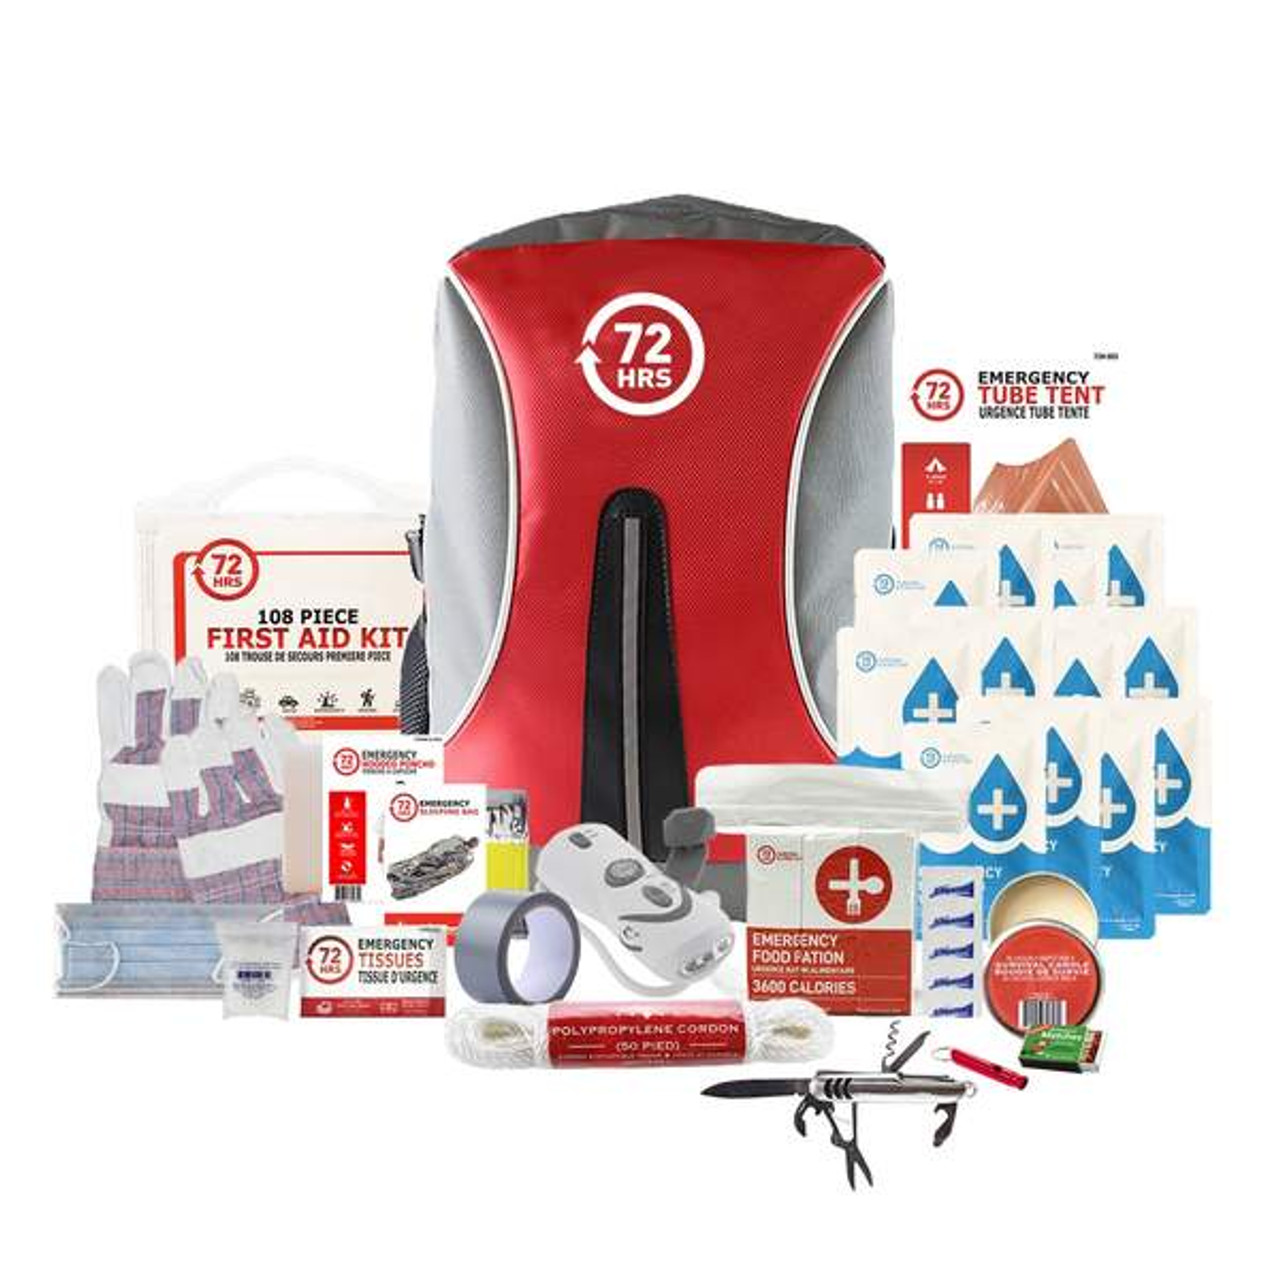 72-Hour Search and Rescue Backpack Kit